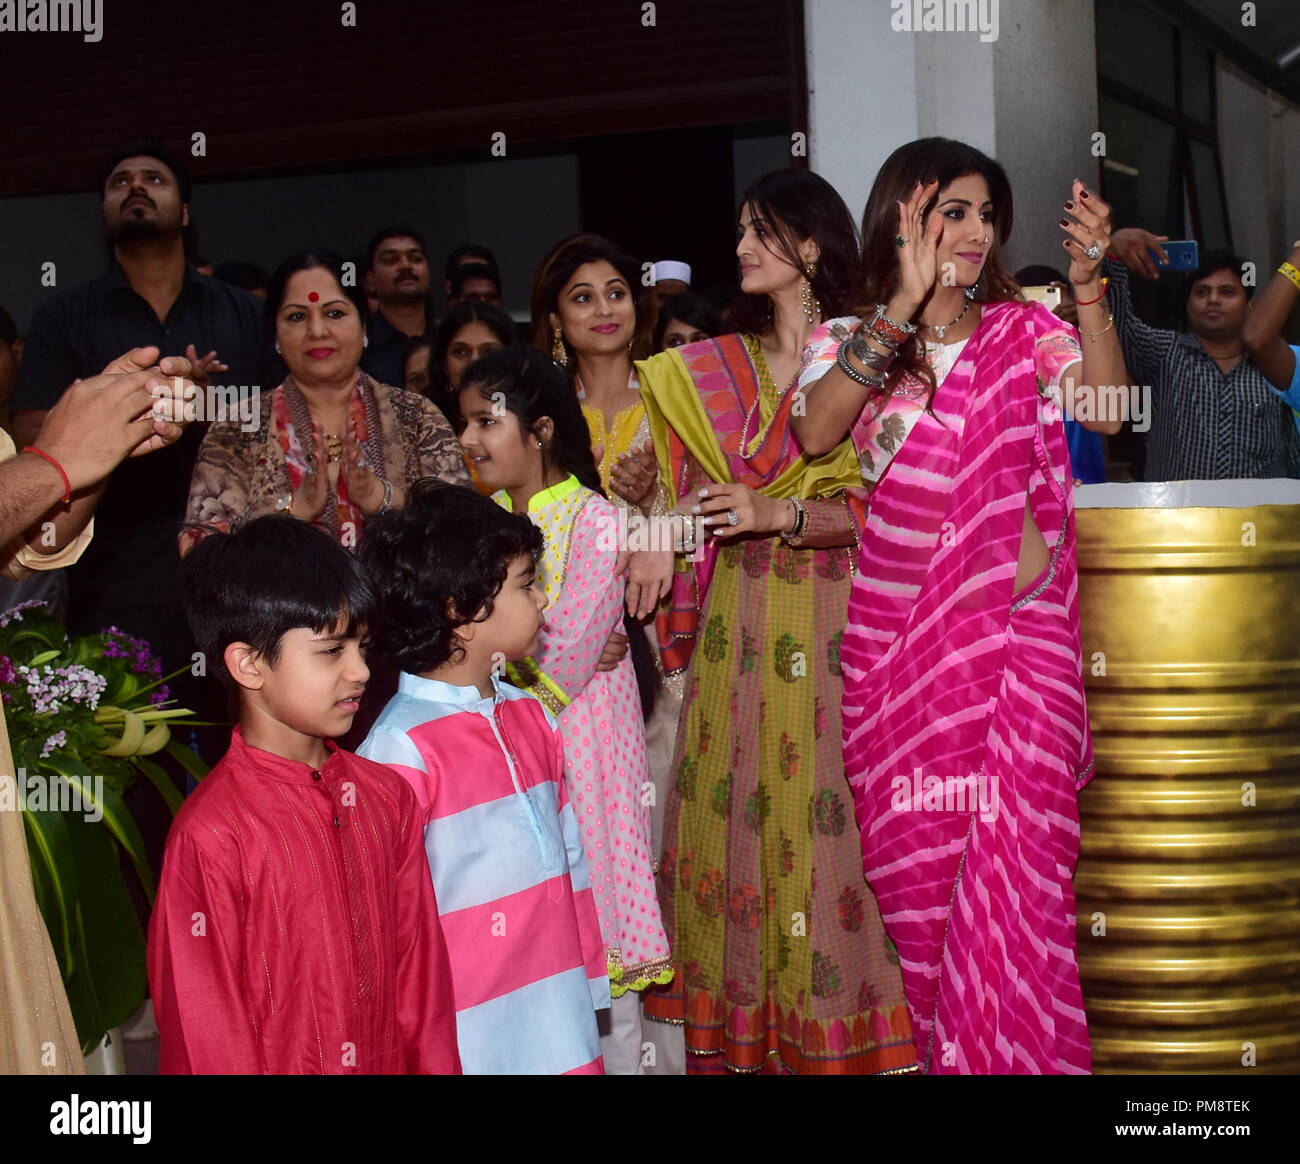 Indian film actress Shilpa Shetty seen rejoicing during a procession at their home. A procession for the immersion of an idol of the elephant-headed Hindu God Lord Ganesh, Hindu devotees take home idols of Lord Ganesha in order to invoke his blessings for wisdom and prosperity. Stock Photo